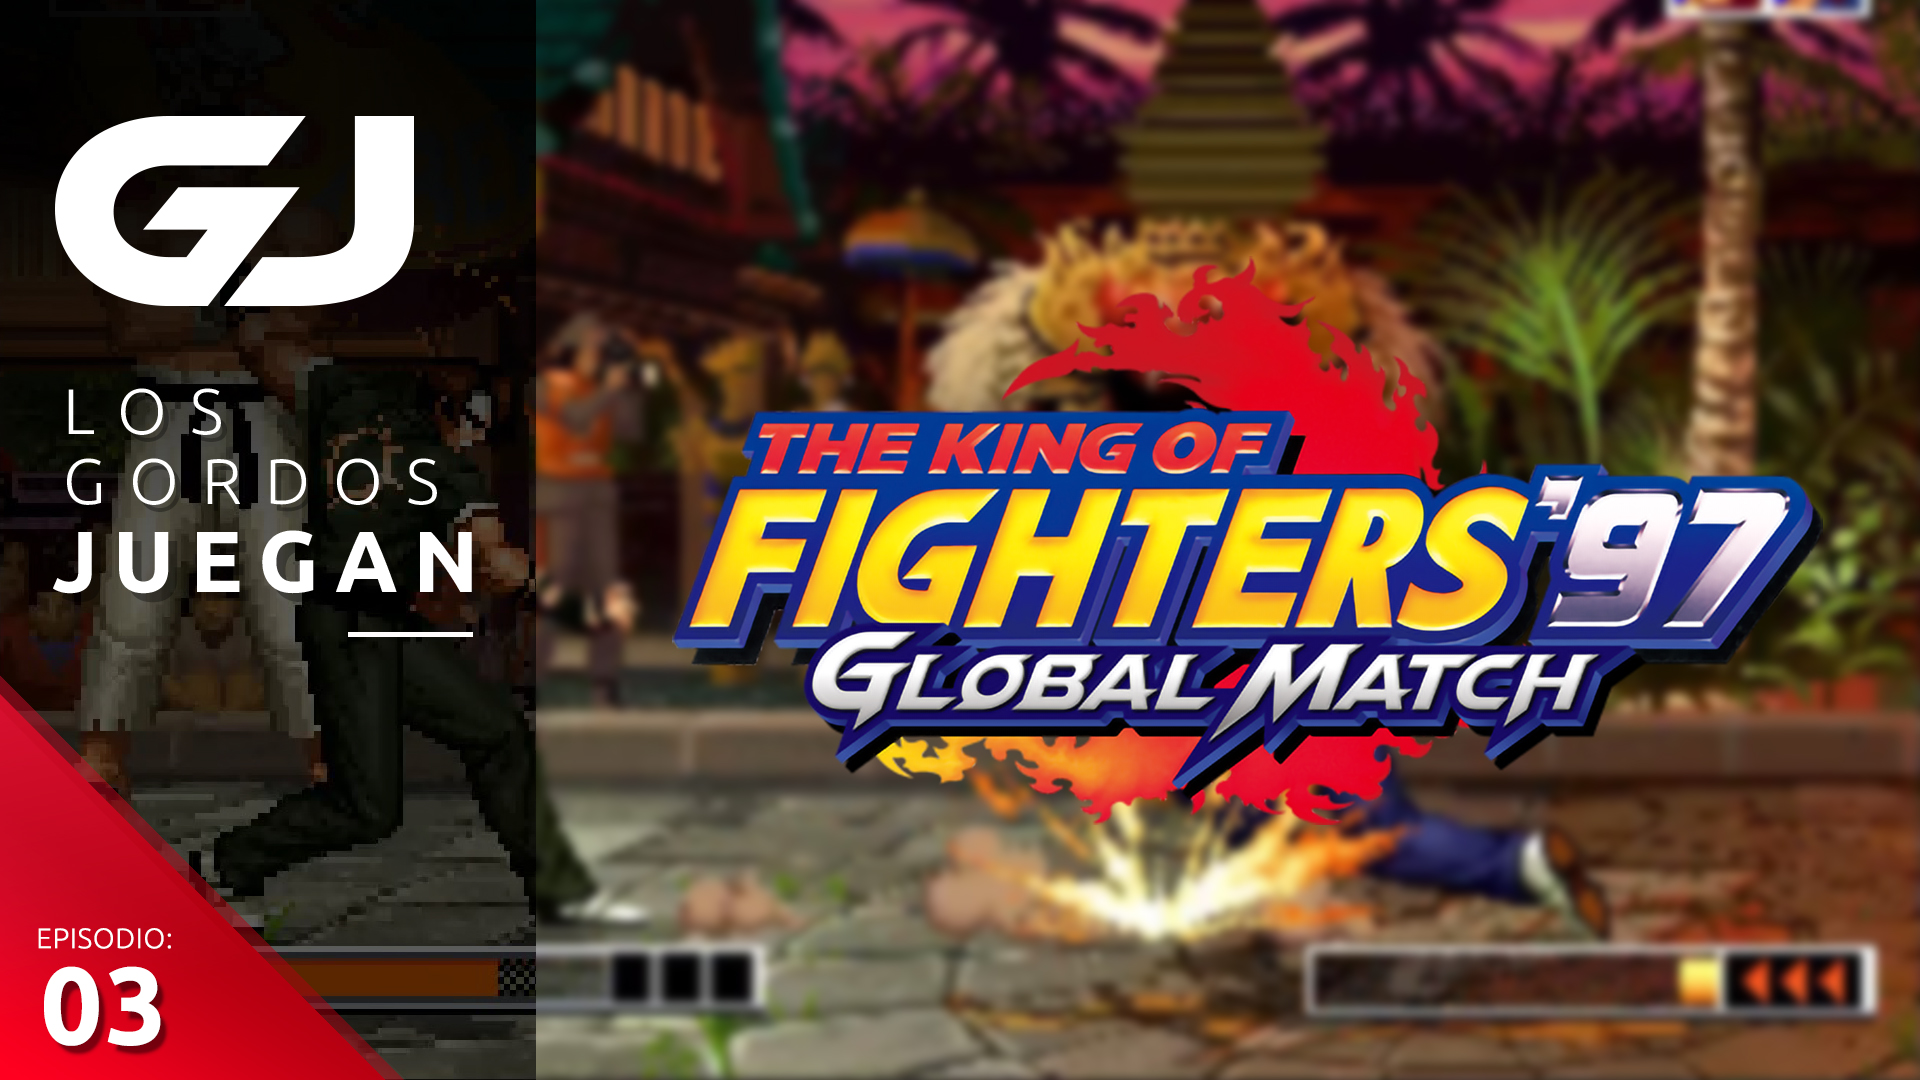 The King of Fighters ’97 Global Match – Los Gordos Juegan – Parte 3